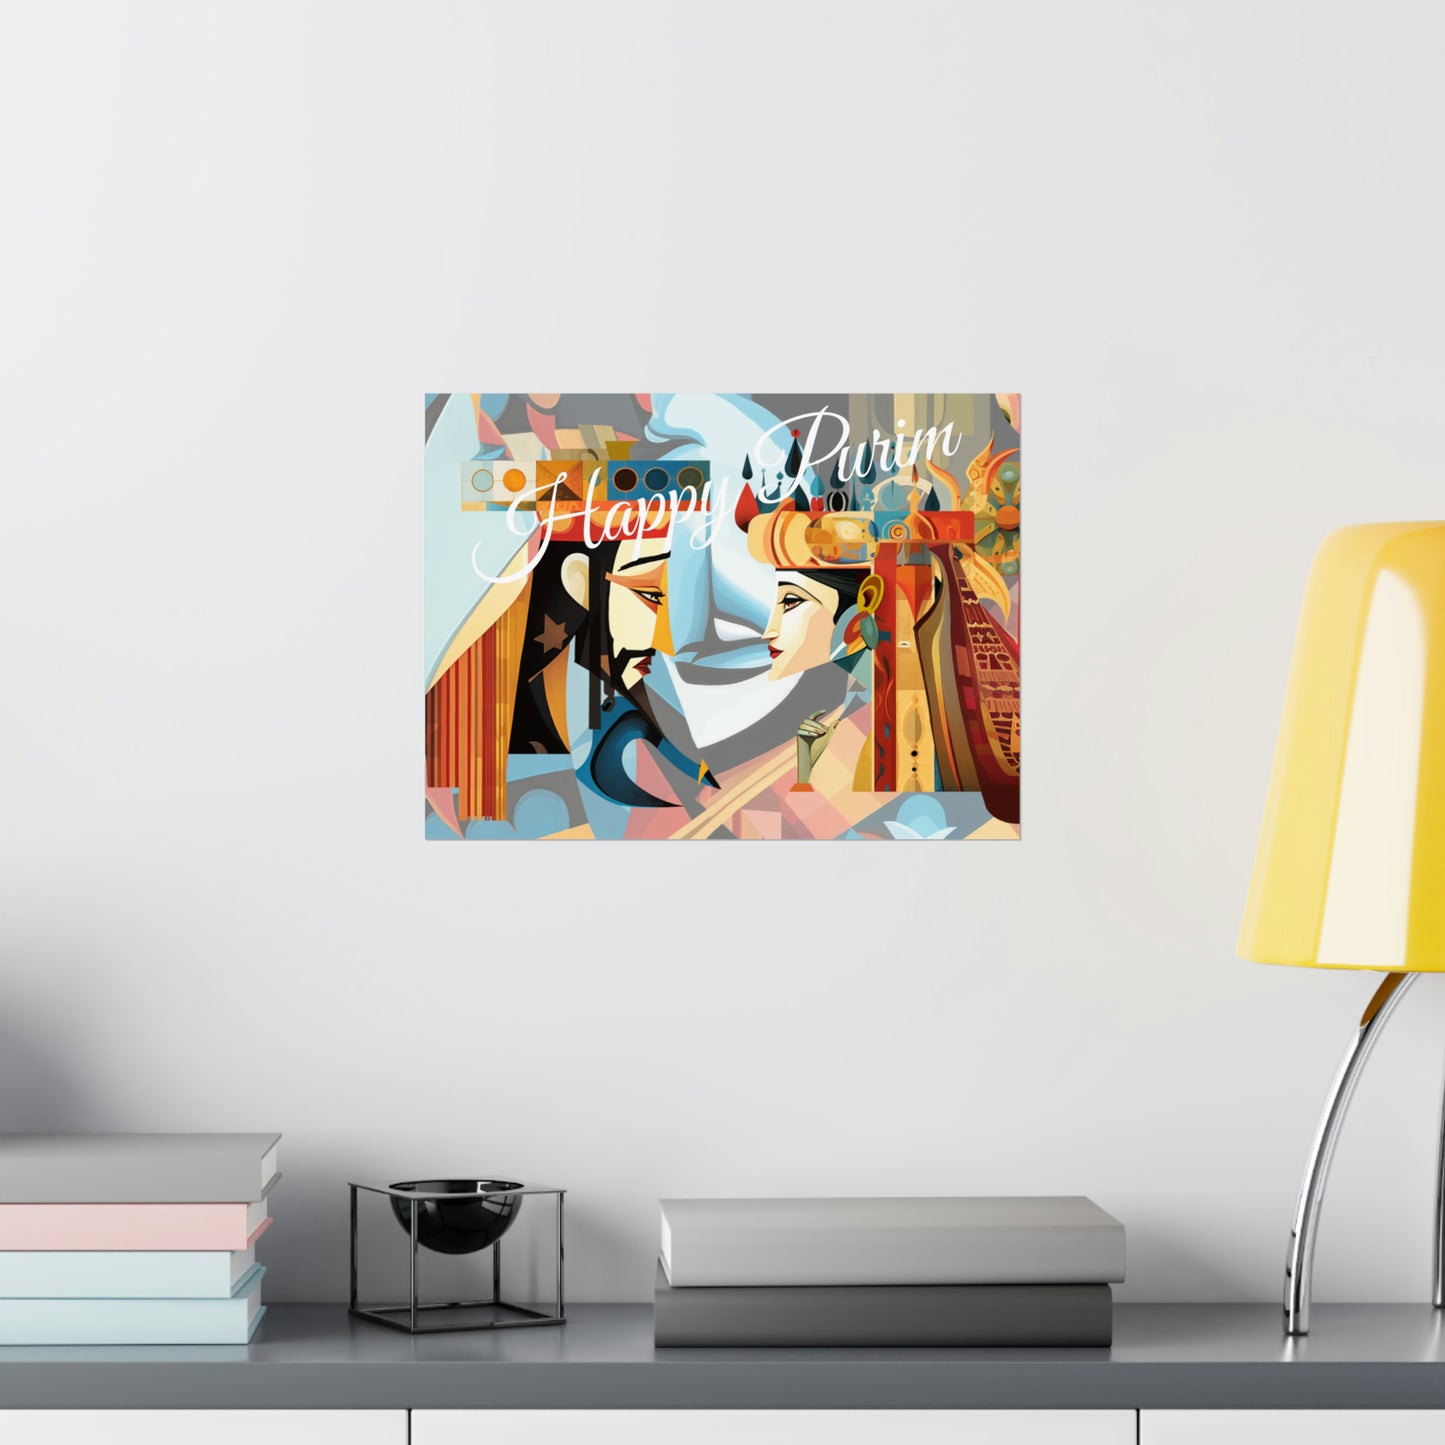 Happy Purim - Queen Esther and Mordecai - Matte Horizontal Poster